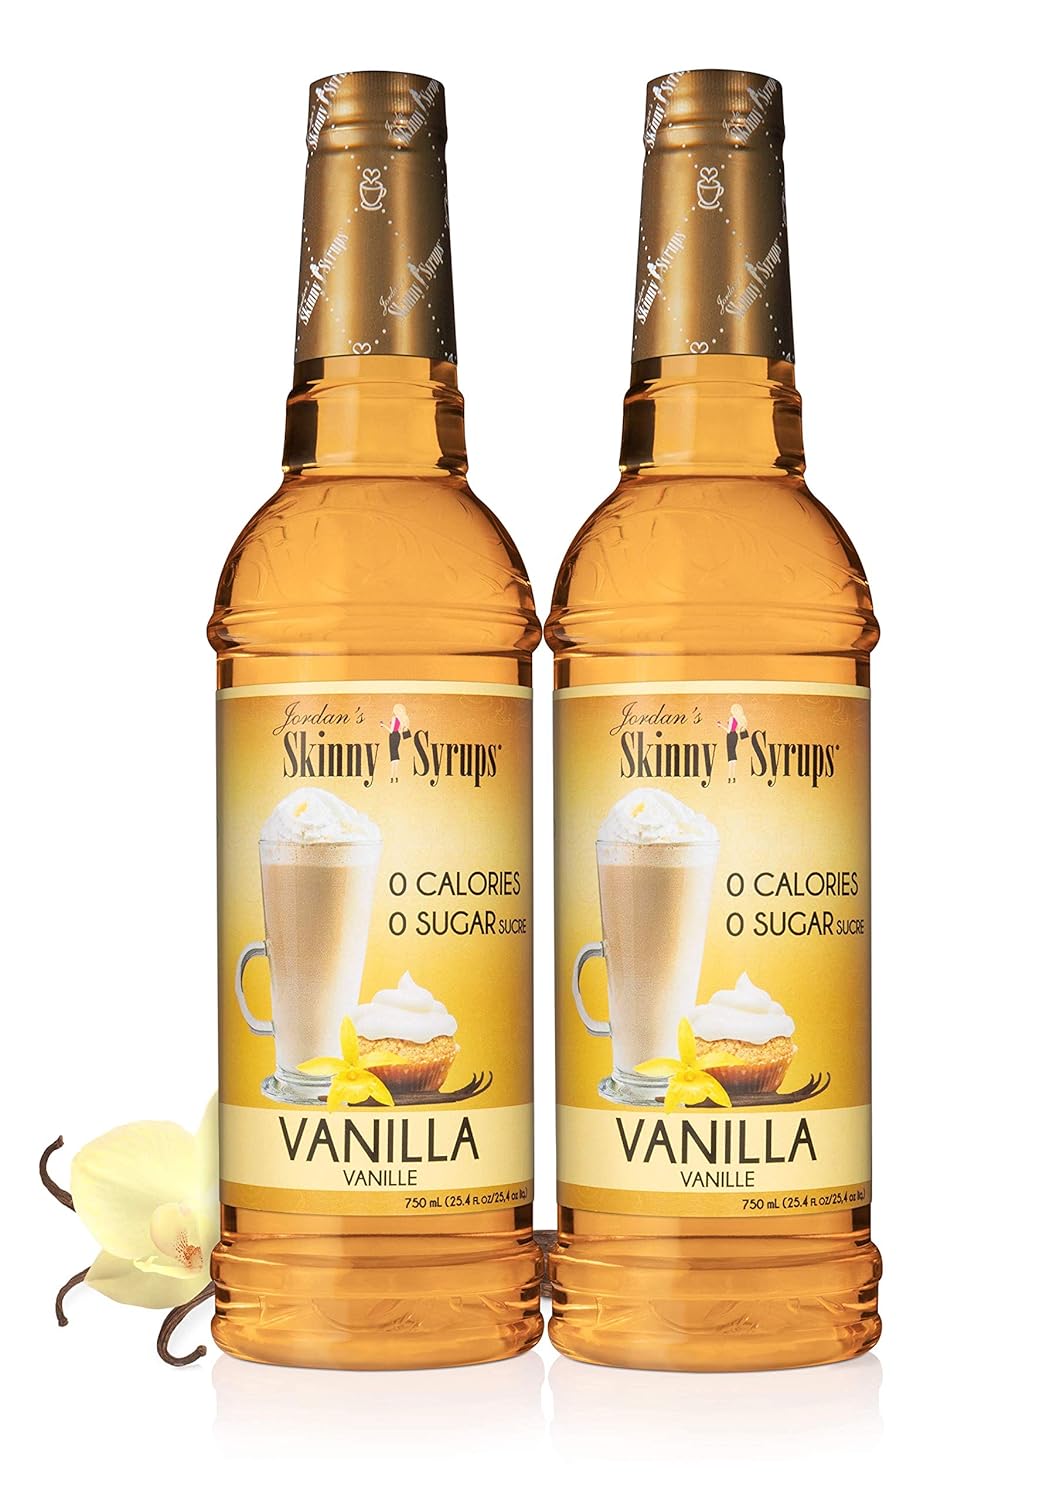 2-Pack 25.4-Oz Jordan's Skinny Mixes Sugar Free Coffee Syrup (Vanilla) $9.50 w/ S&S + Free Shipping w/ Prime or on $35+